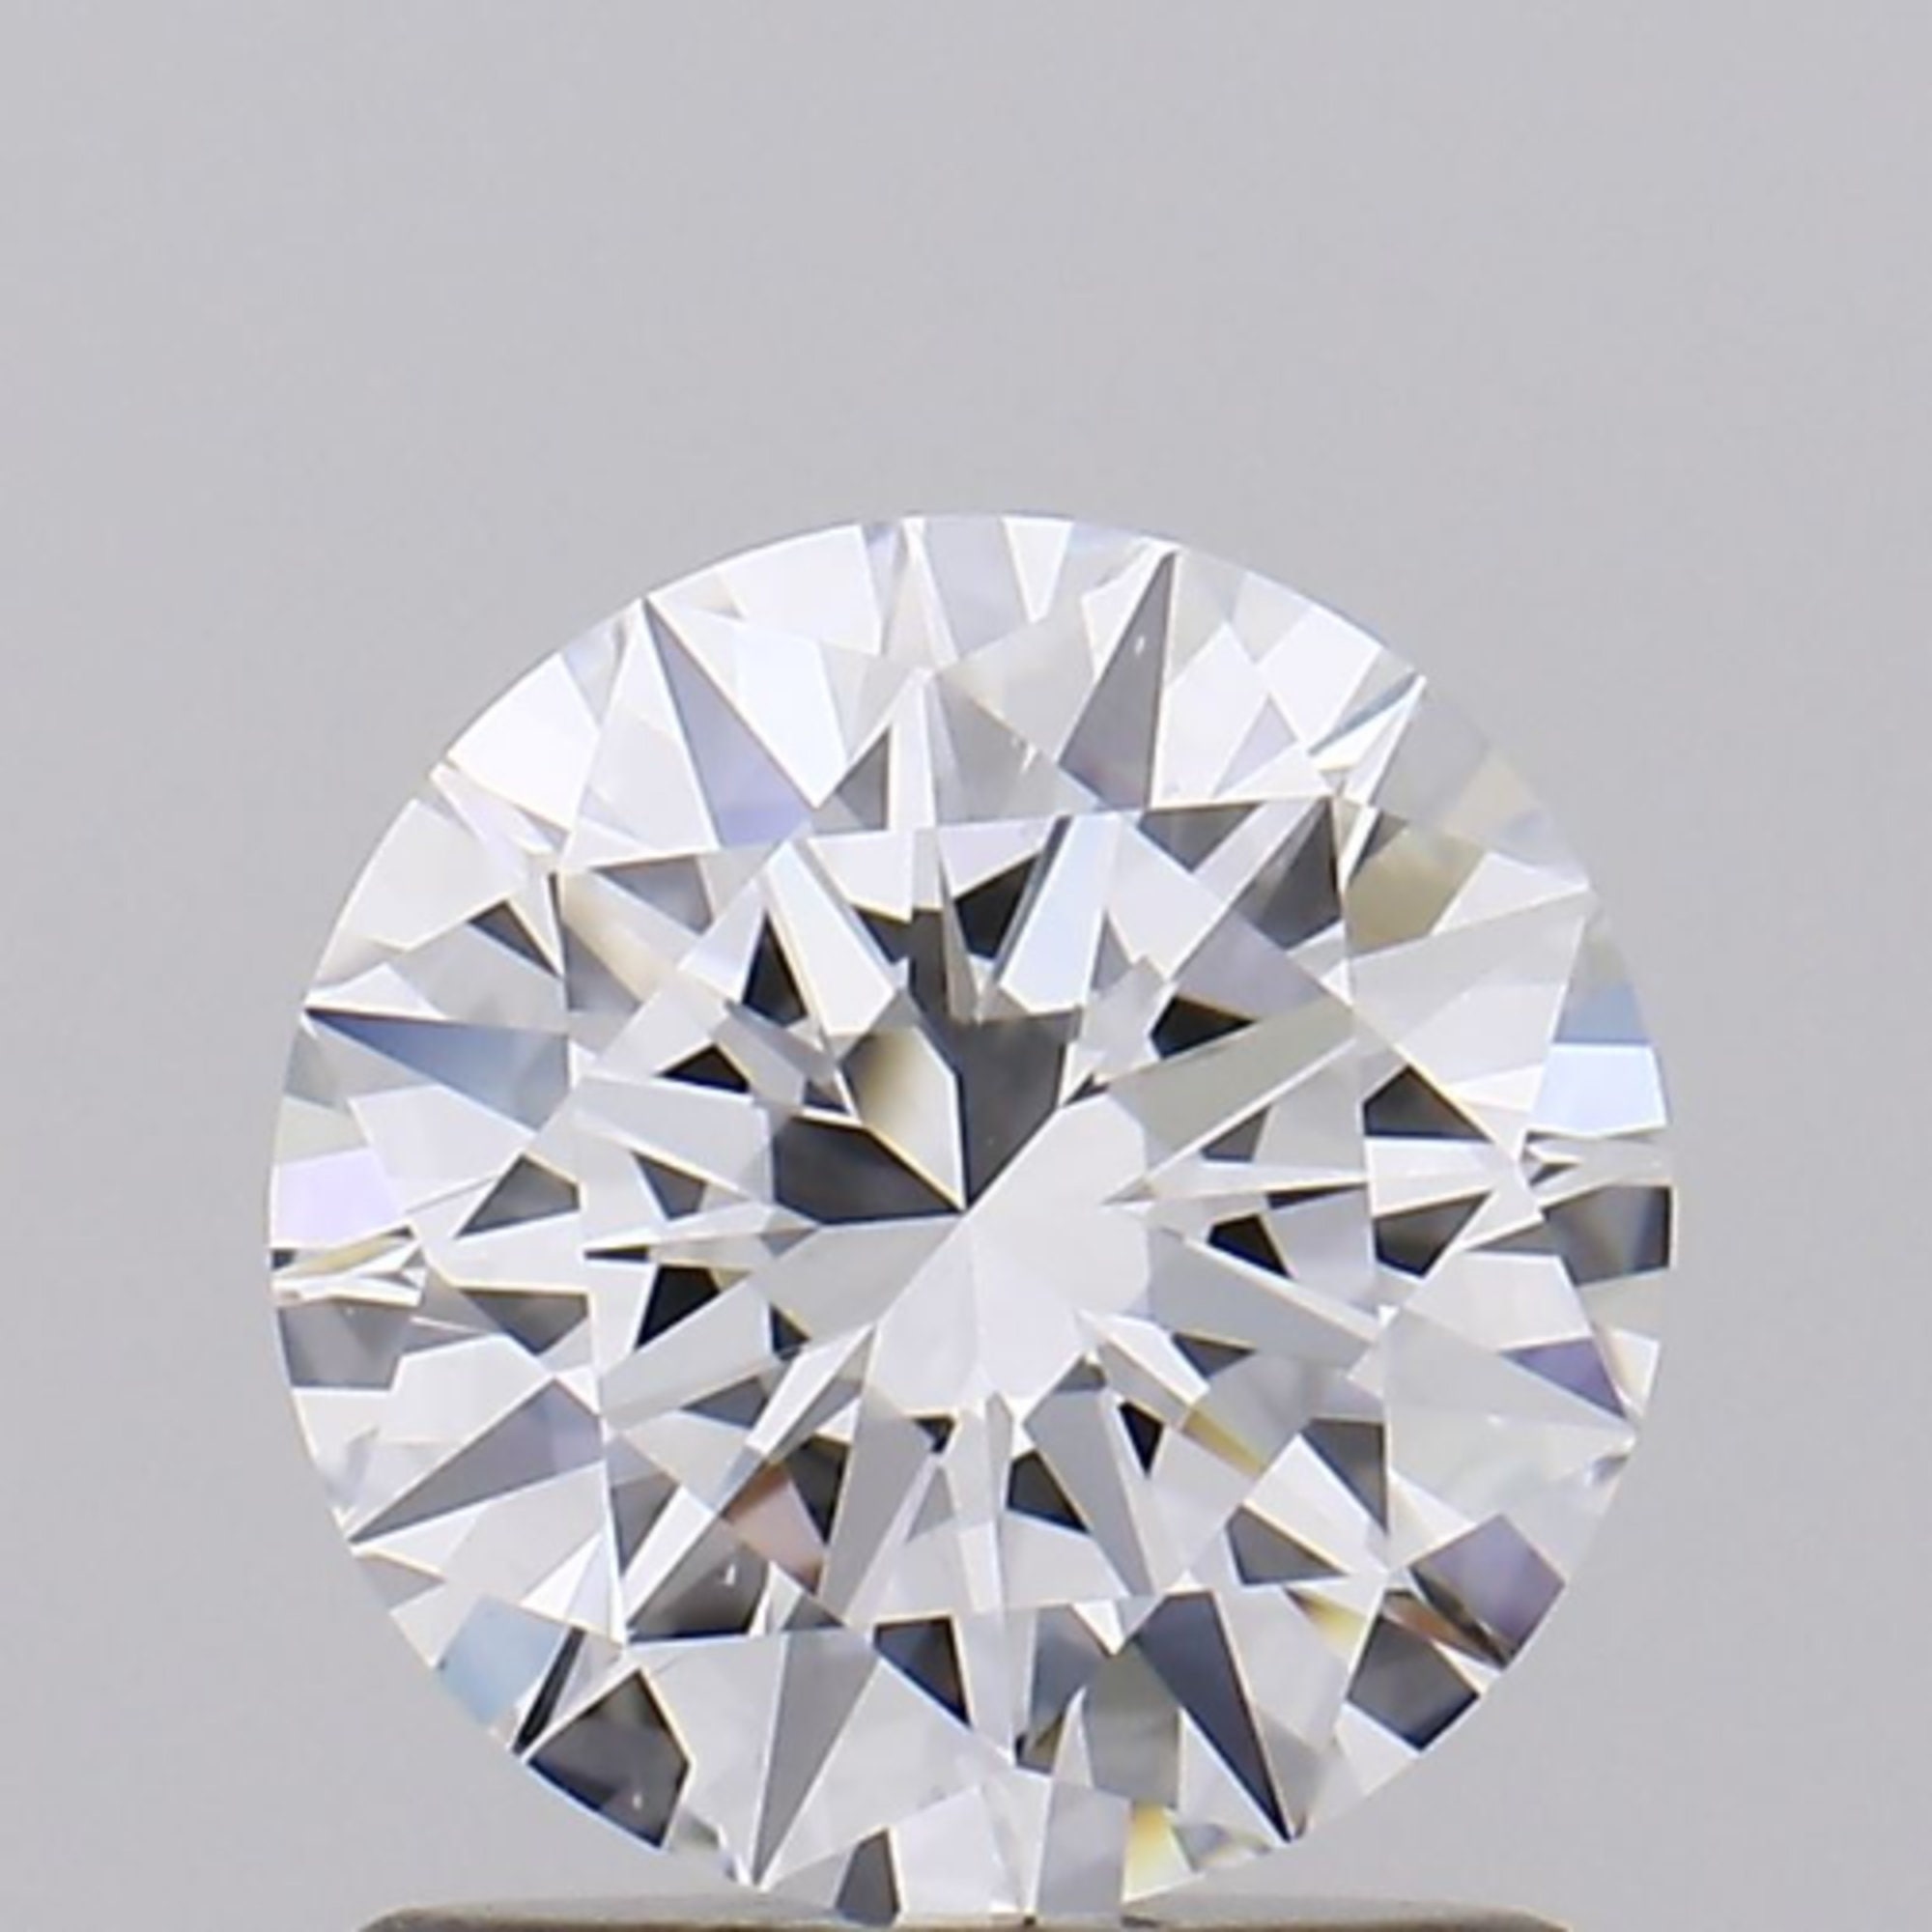 Loose CVD Diamond EGL CERTIFIED 0.42 Ct White-G Color SI1 Clarity 5 mm